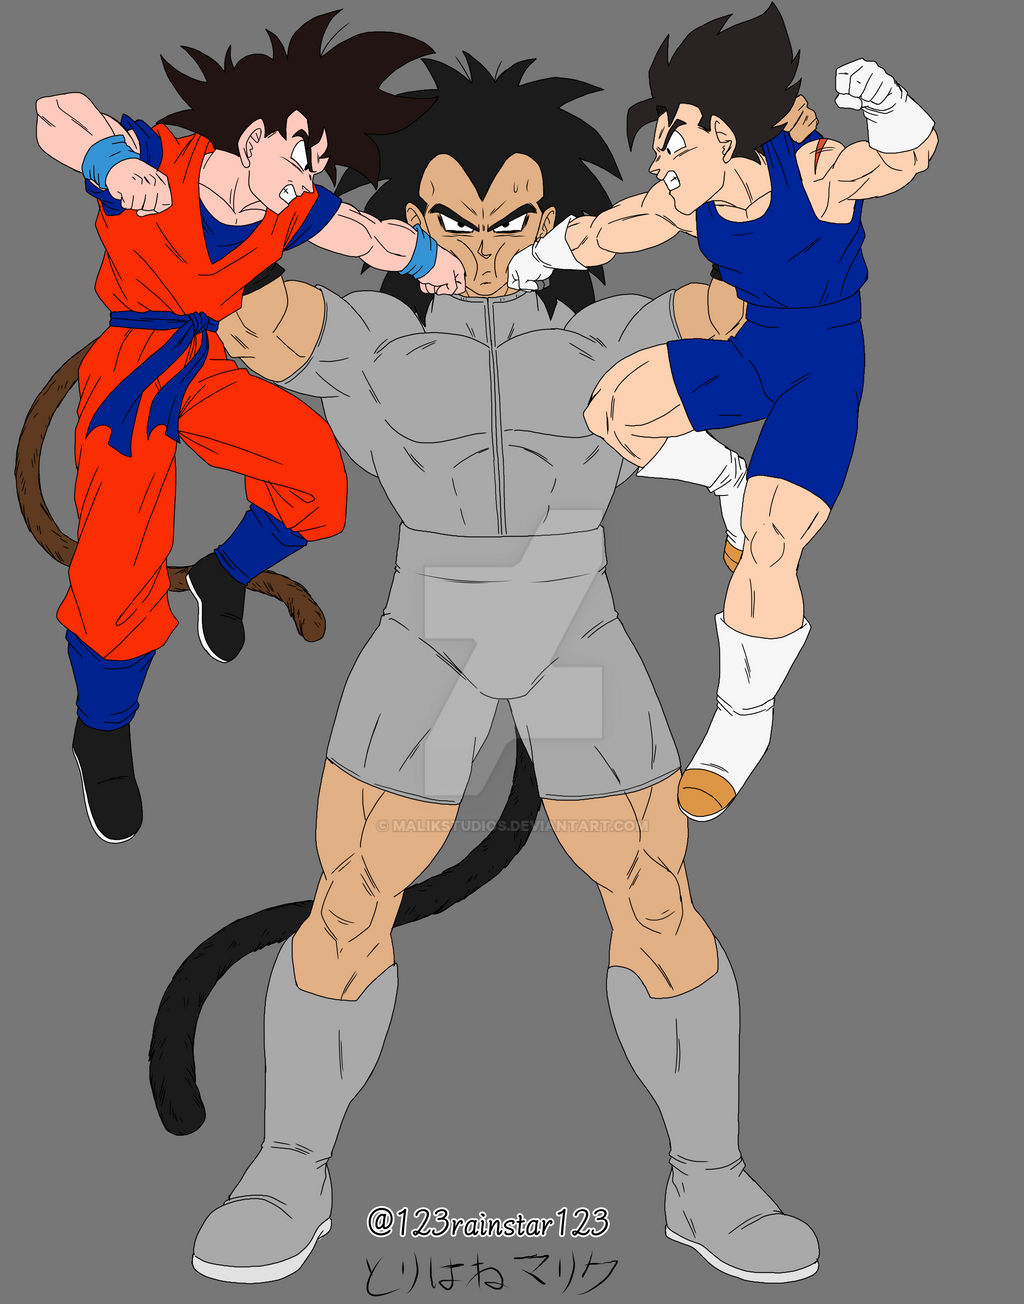 The end of Baby - Dragon Ball GT by orco05 on DeviantArt